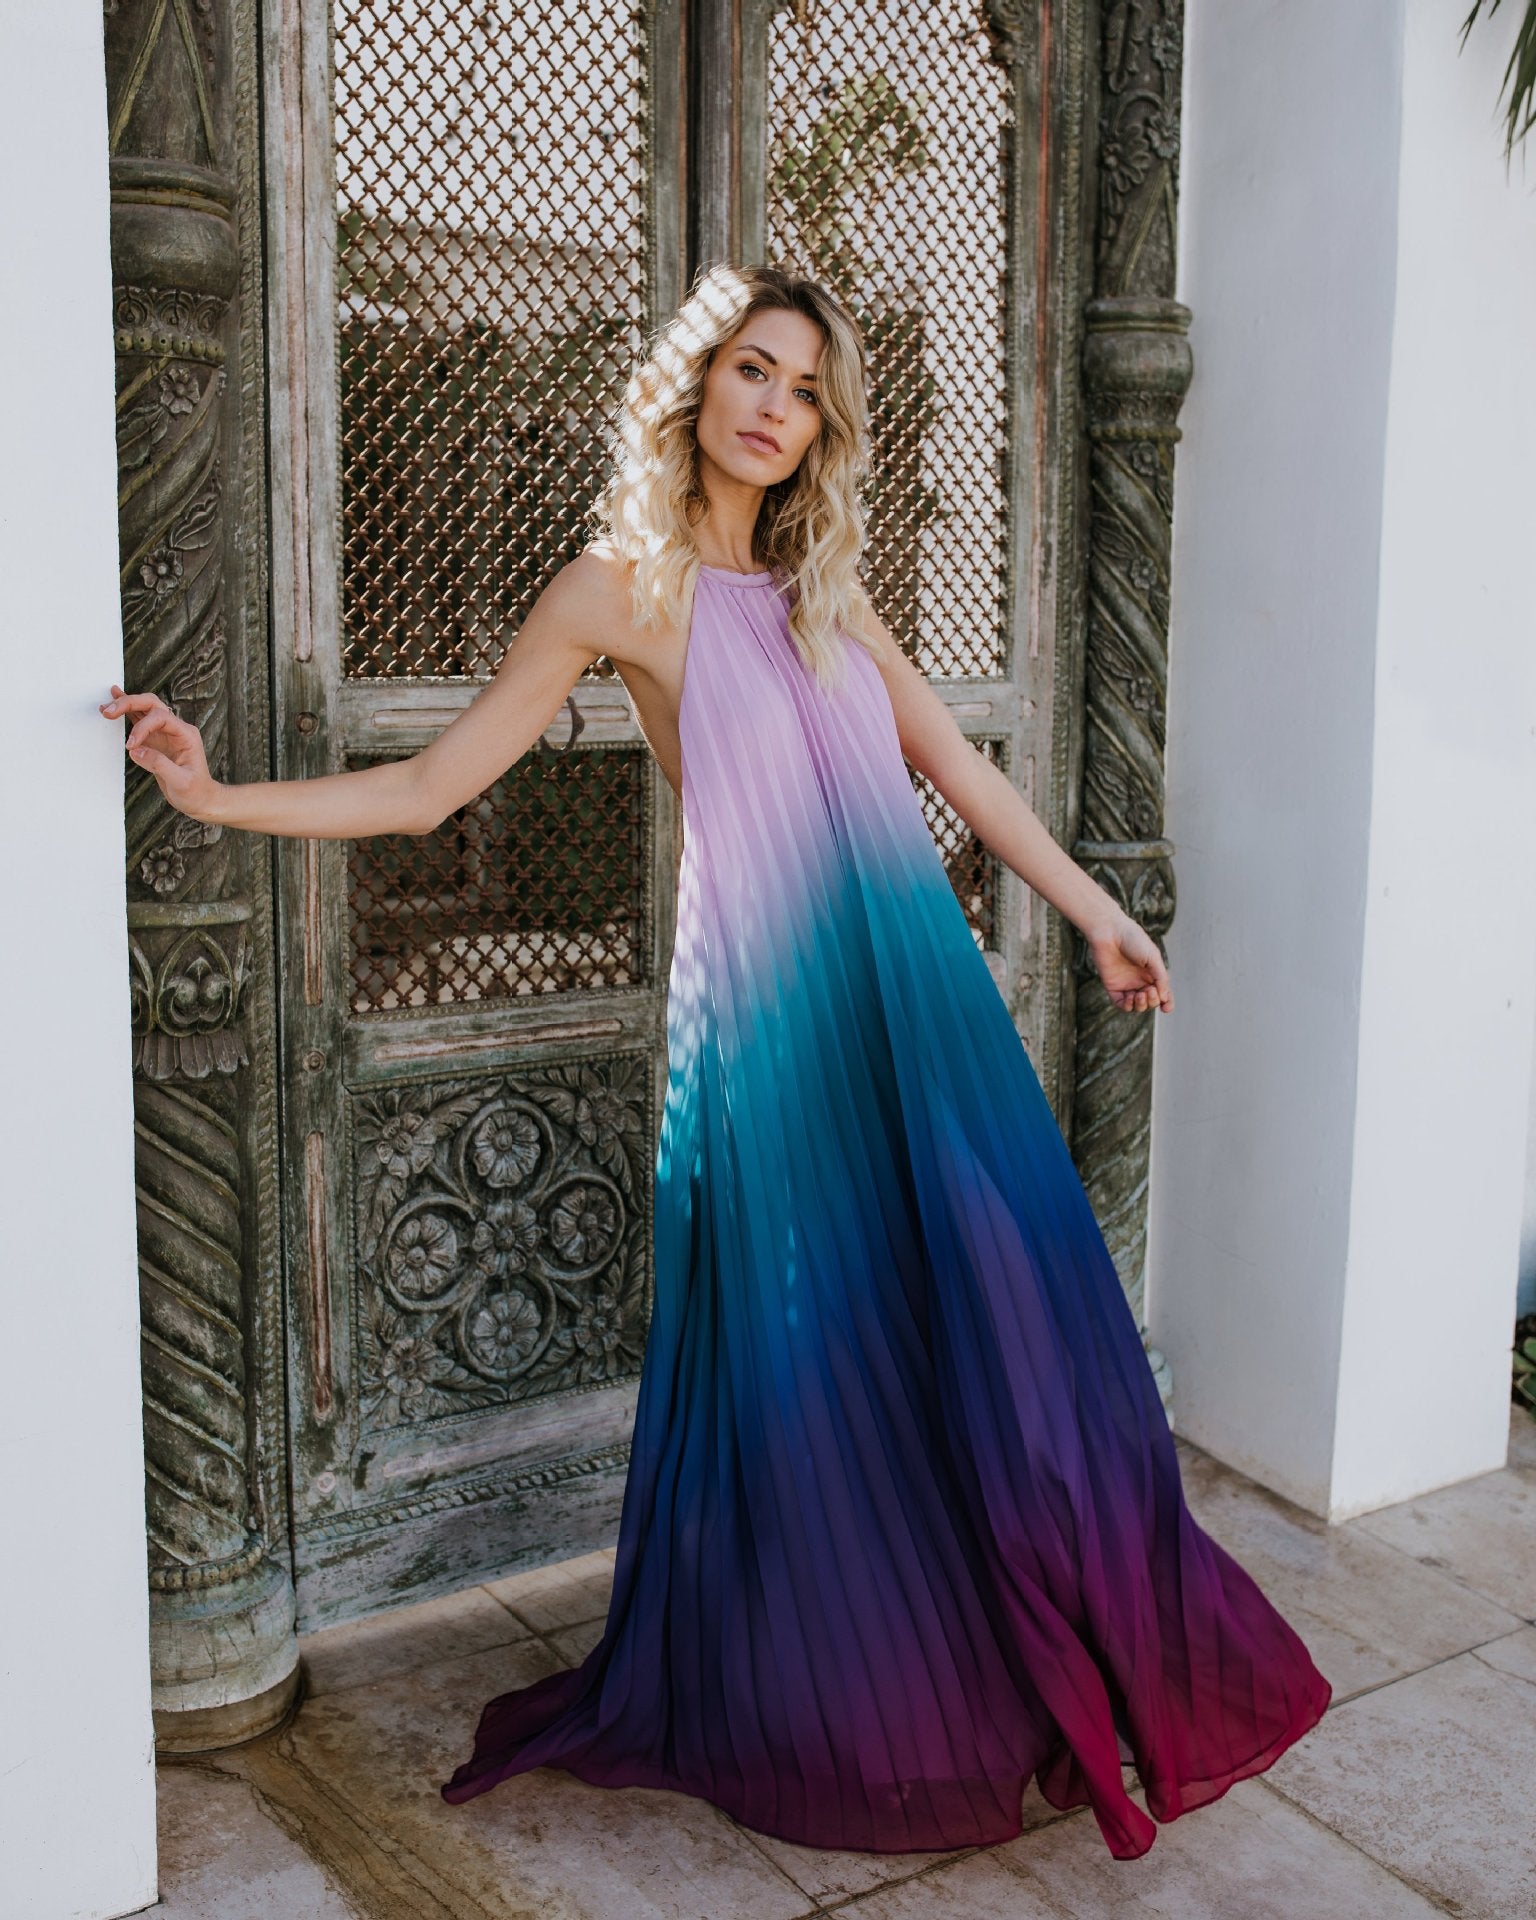 Tropic Of Discussion Cotton Tiered Maxi Dress - FINAL SALE ENDL-001